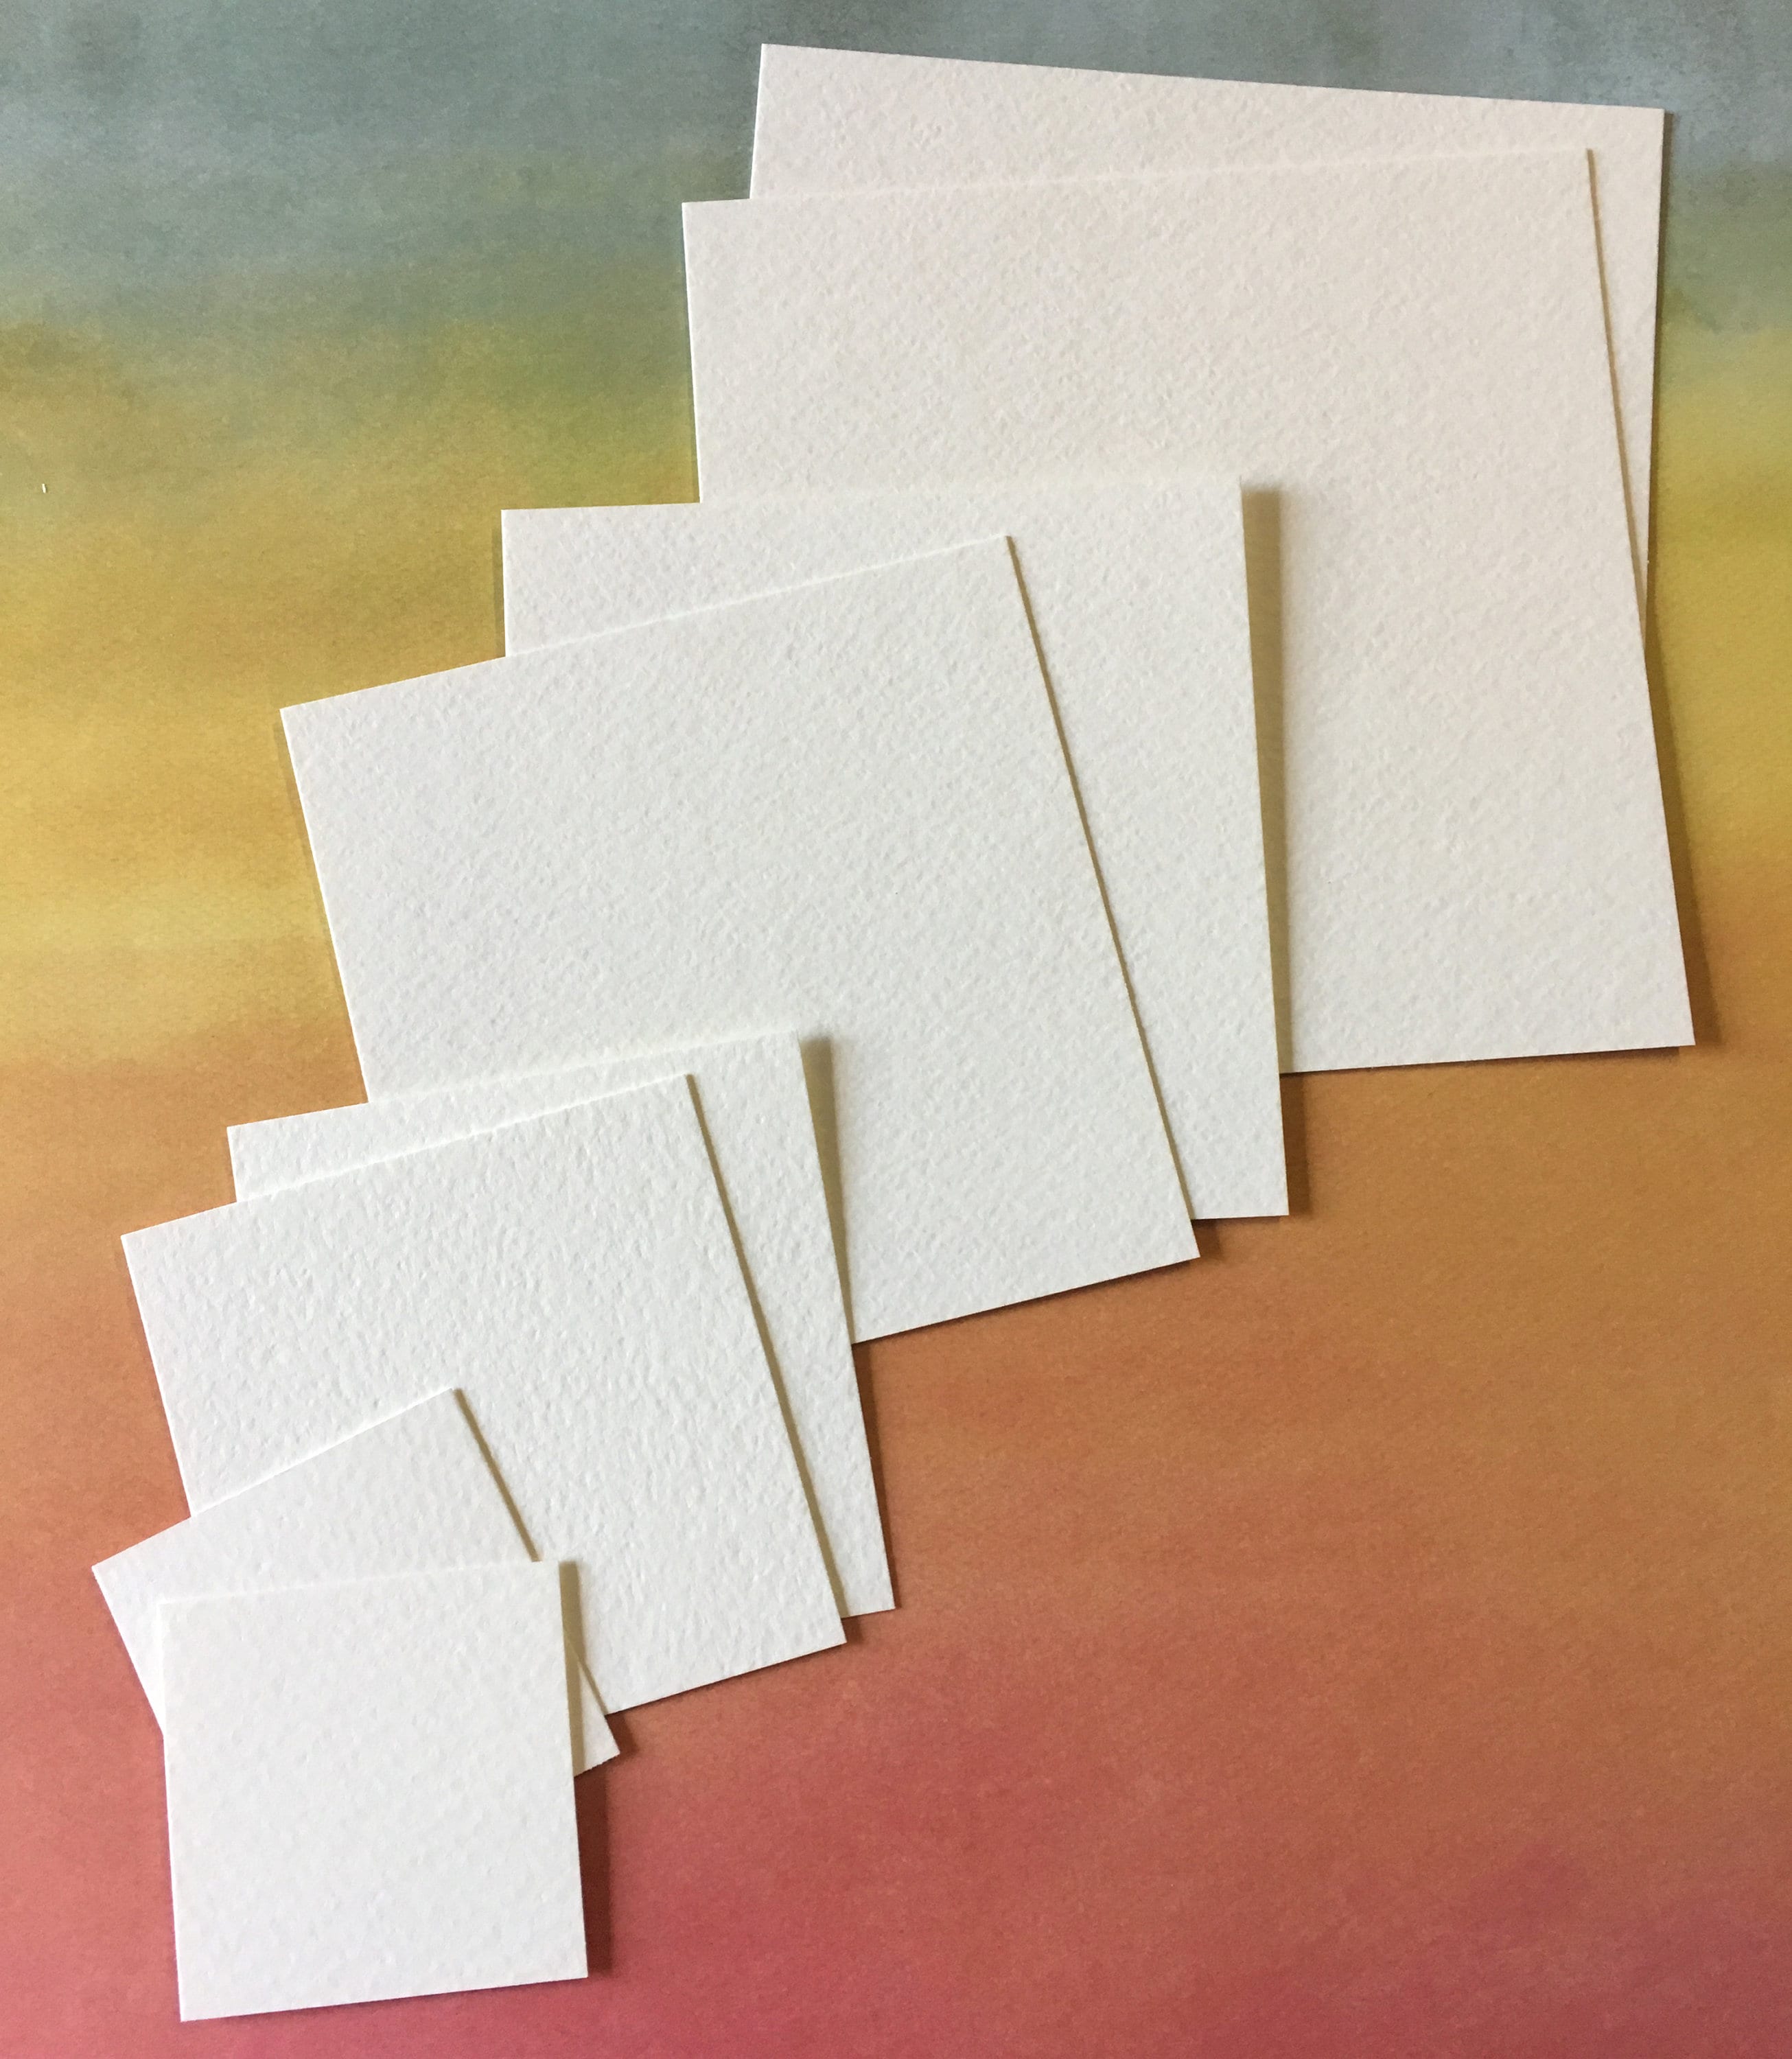 Watercolor 5 X 7 Postcards 20 Strathmore 300 Series 140 Lb Cardstock  Textured White Art Supplies Blank Cards Watercolour Cards 